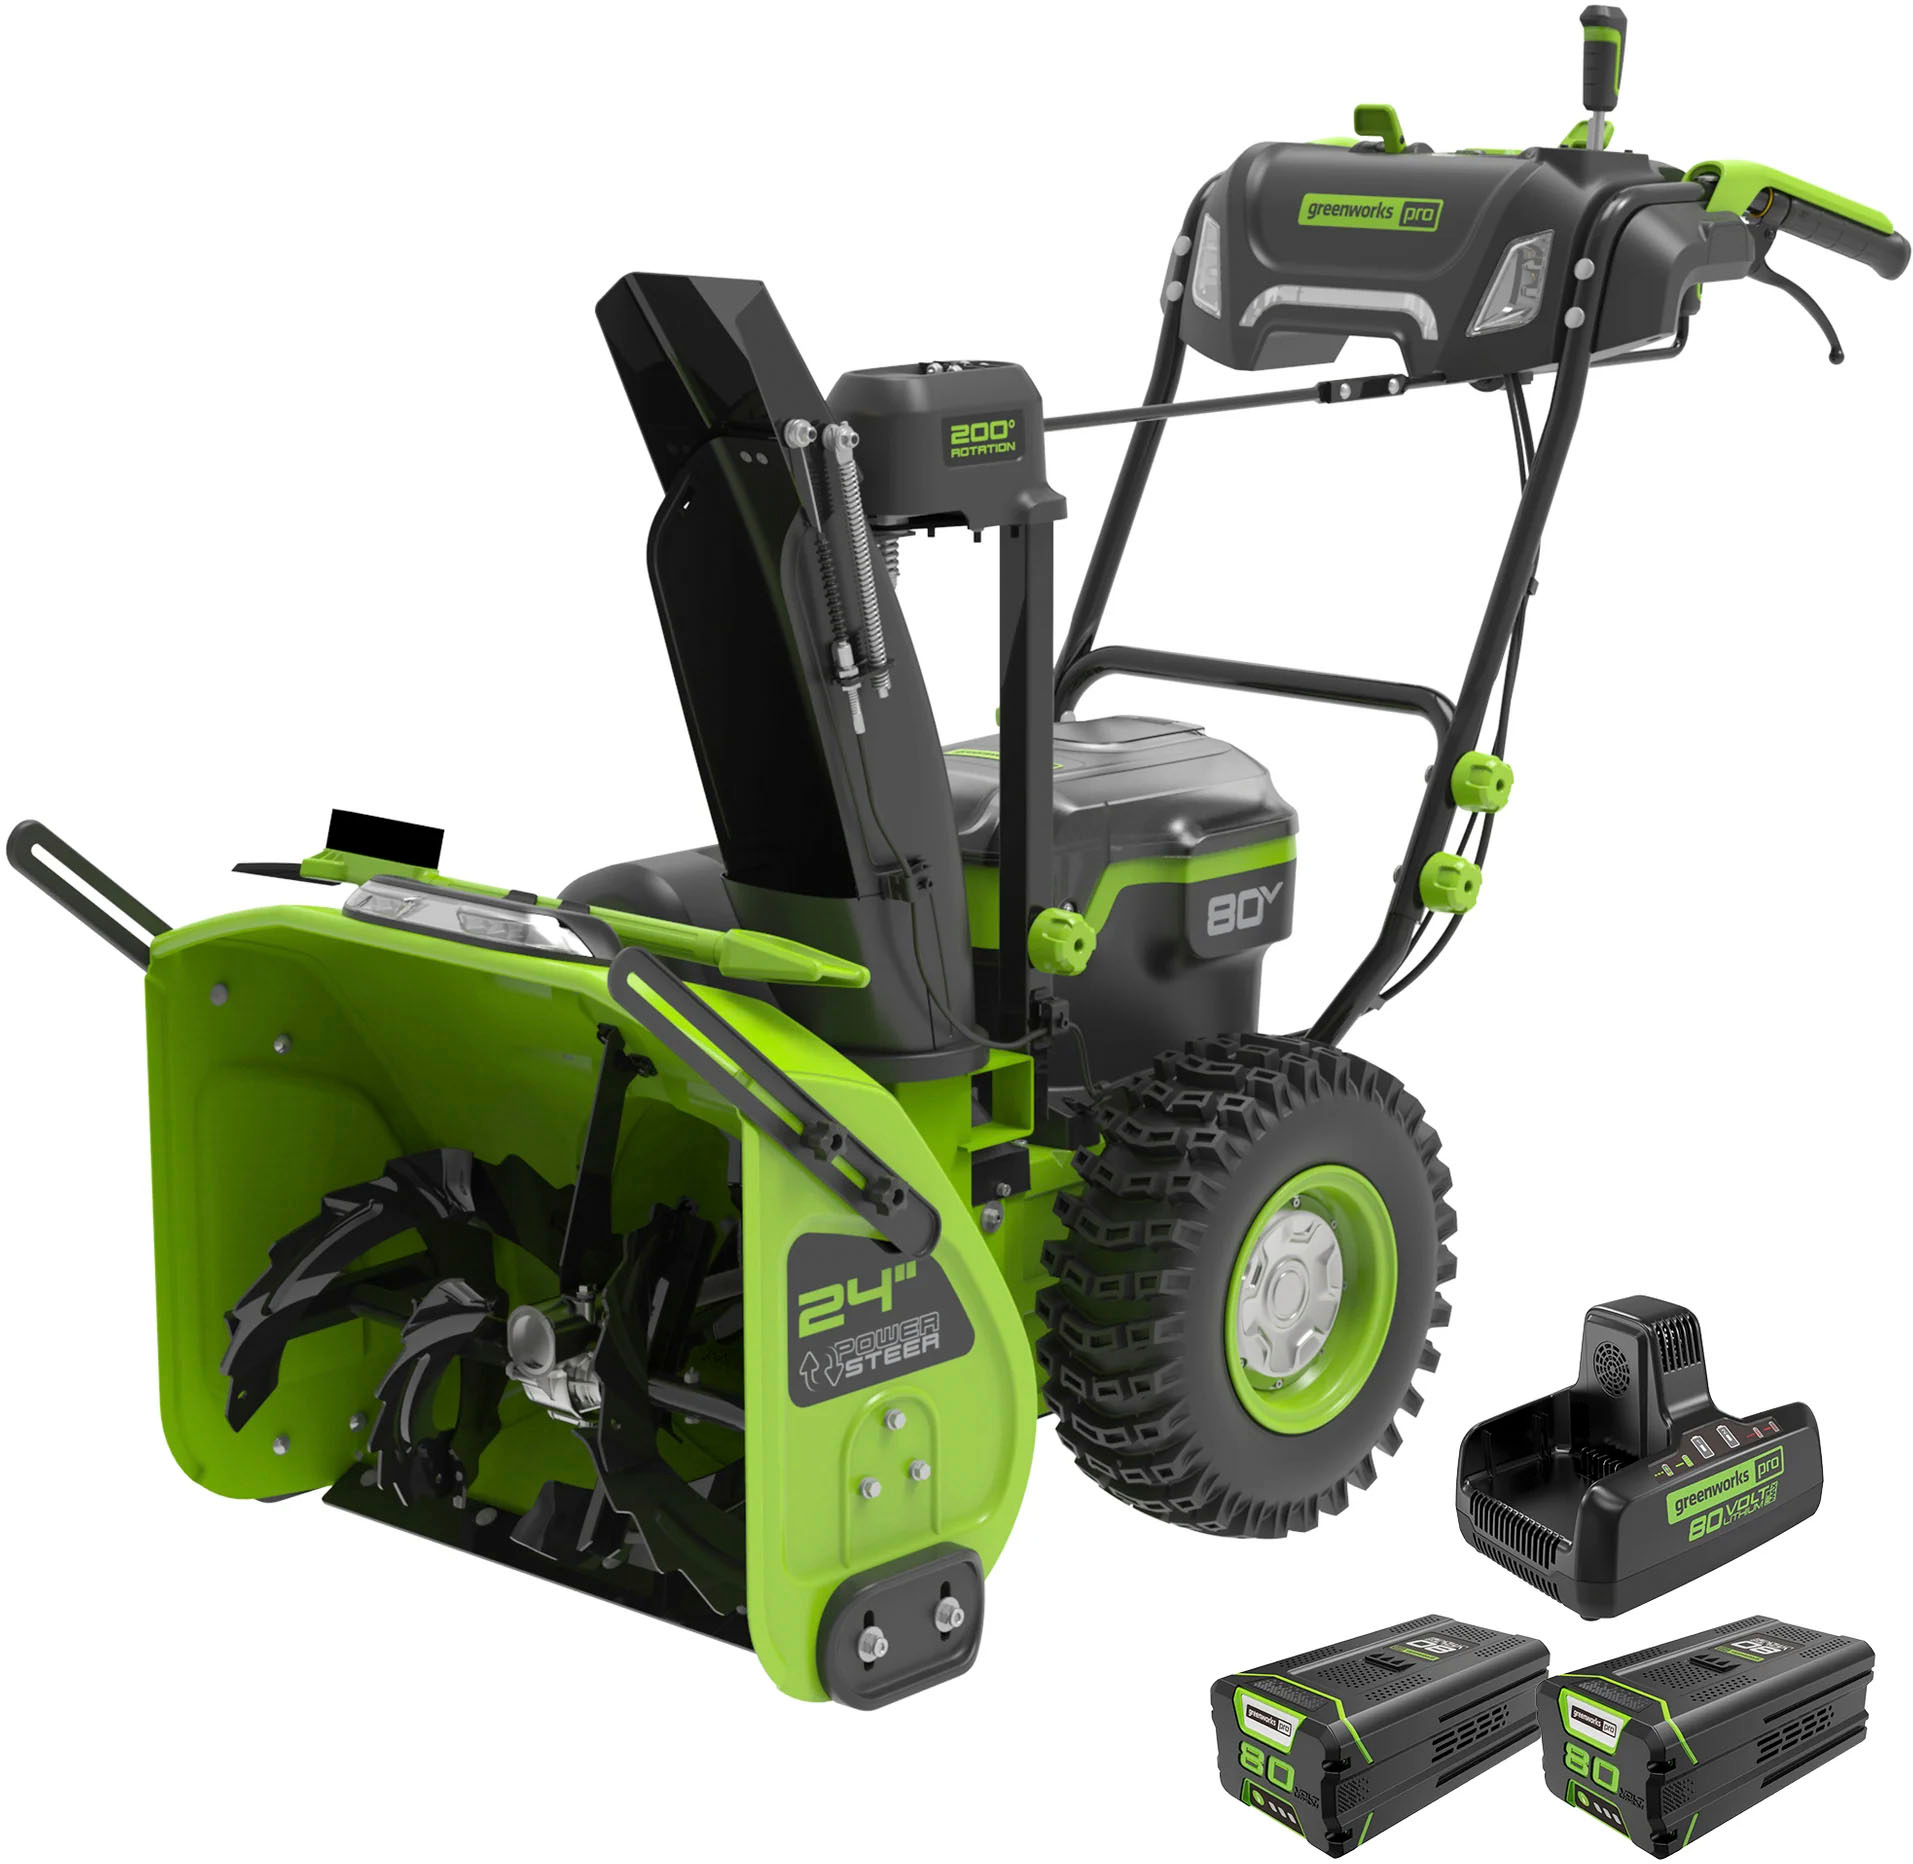 Angle View: Greenworks - 80V 24” Cordless Brushless Two-Stage Snow Blower with (2) 4.0 Batteries and Dual-Port Turbo Charger - Green